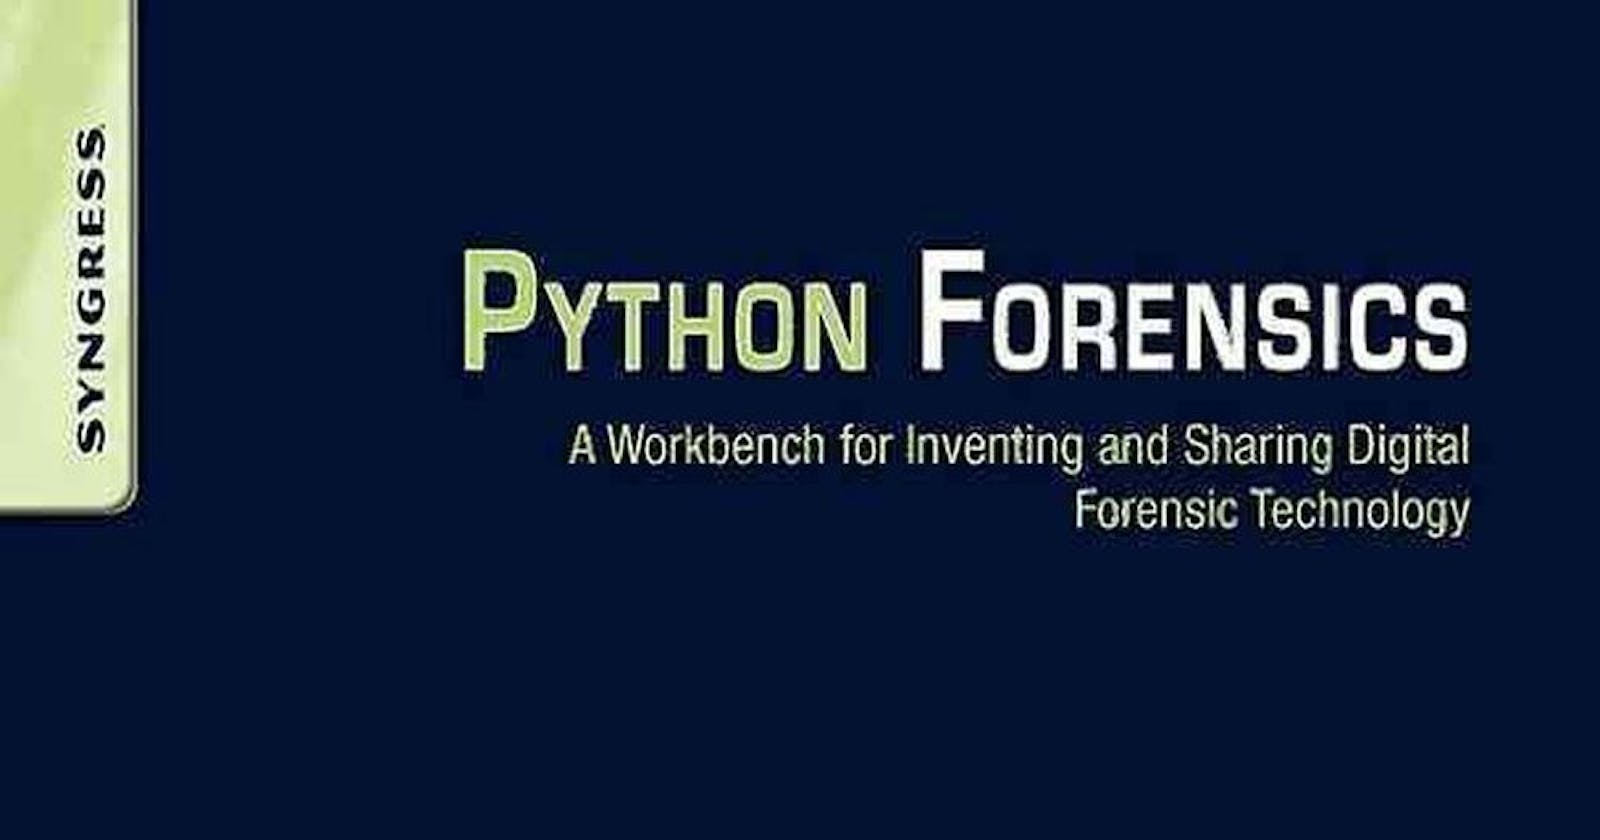 [Book Review] Python Forensics: A Workbench for Inventing and Sharing Digital Forensic Technology